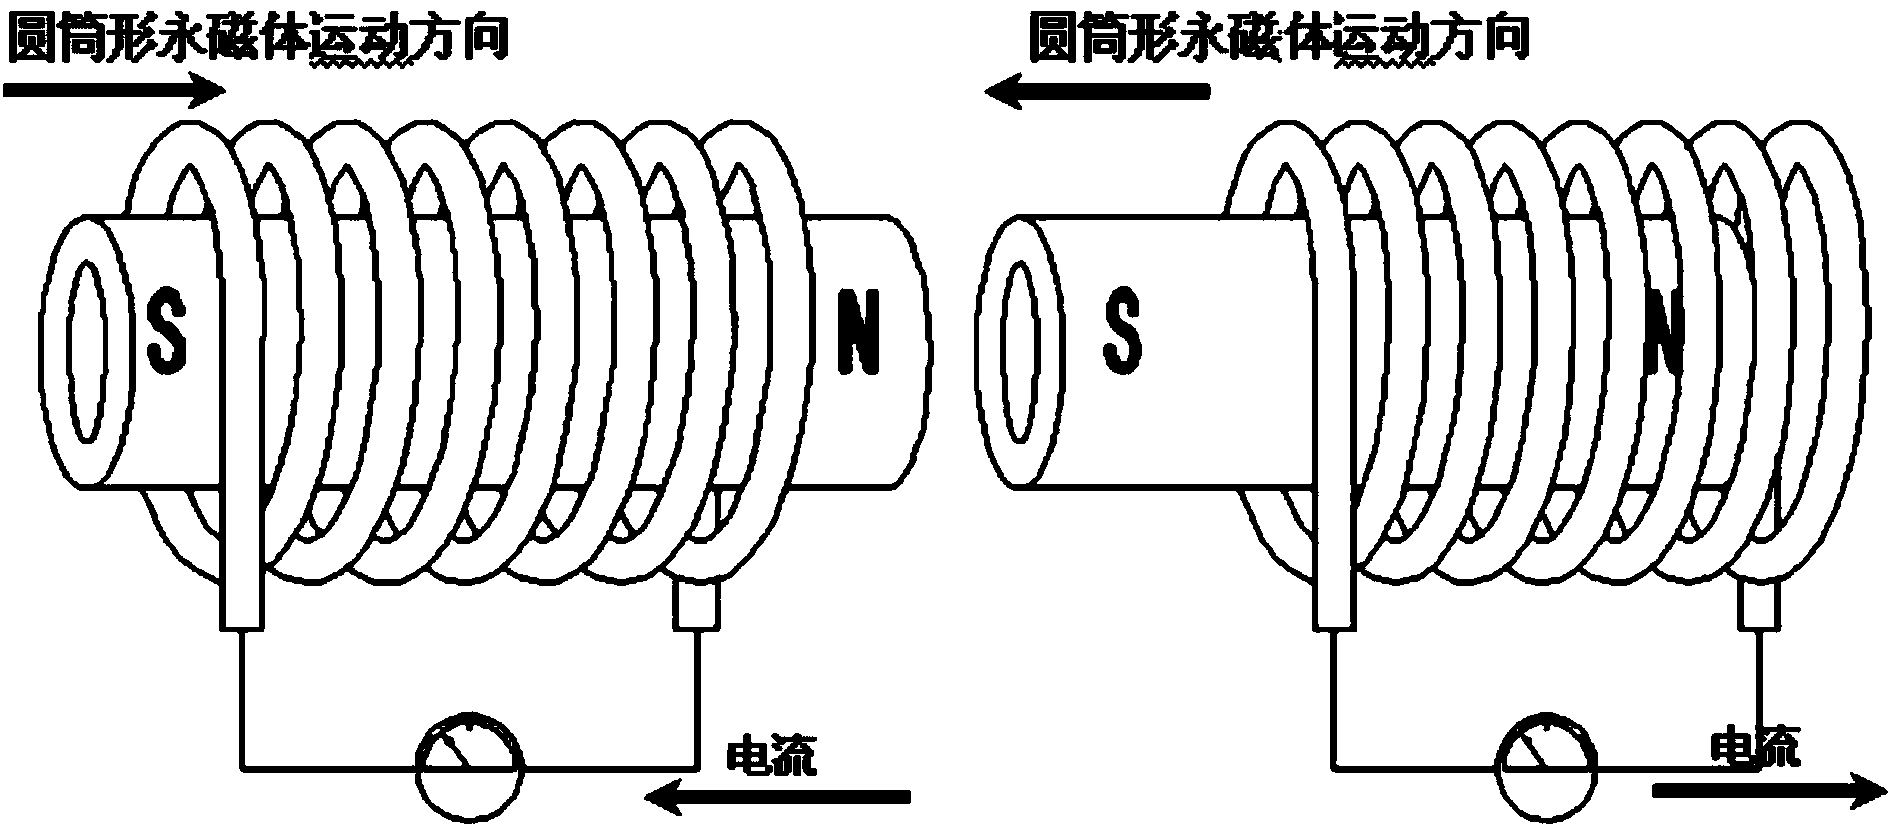 Electromagnet driving type Fabry-Perot optical filter adjustable in wave length